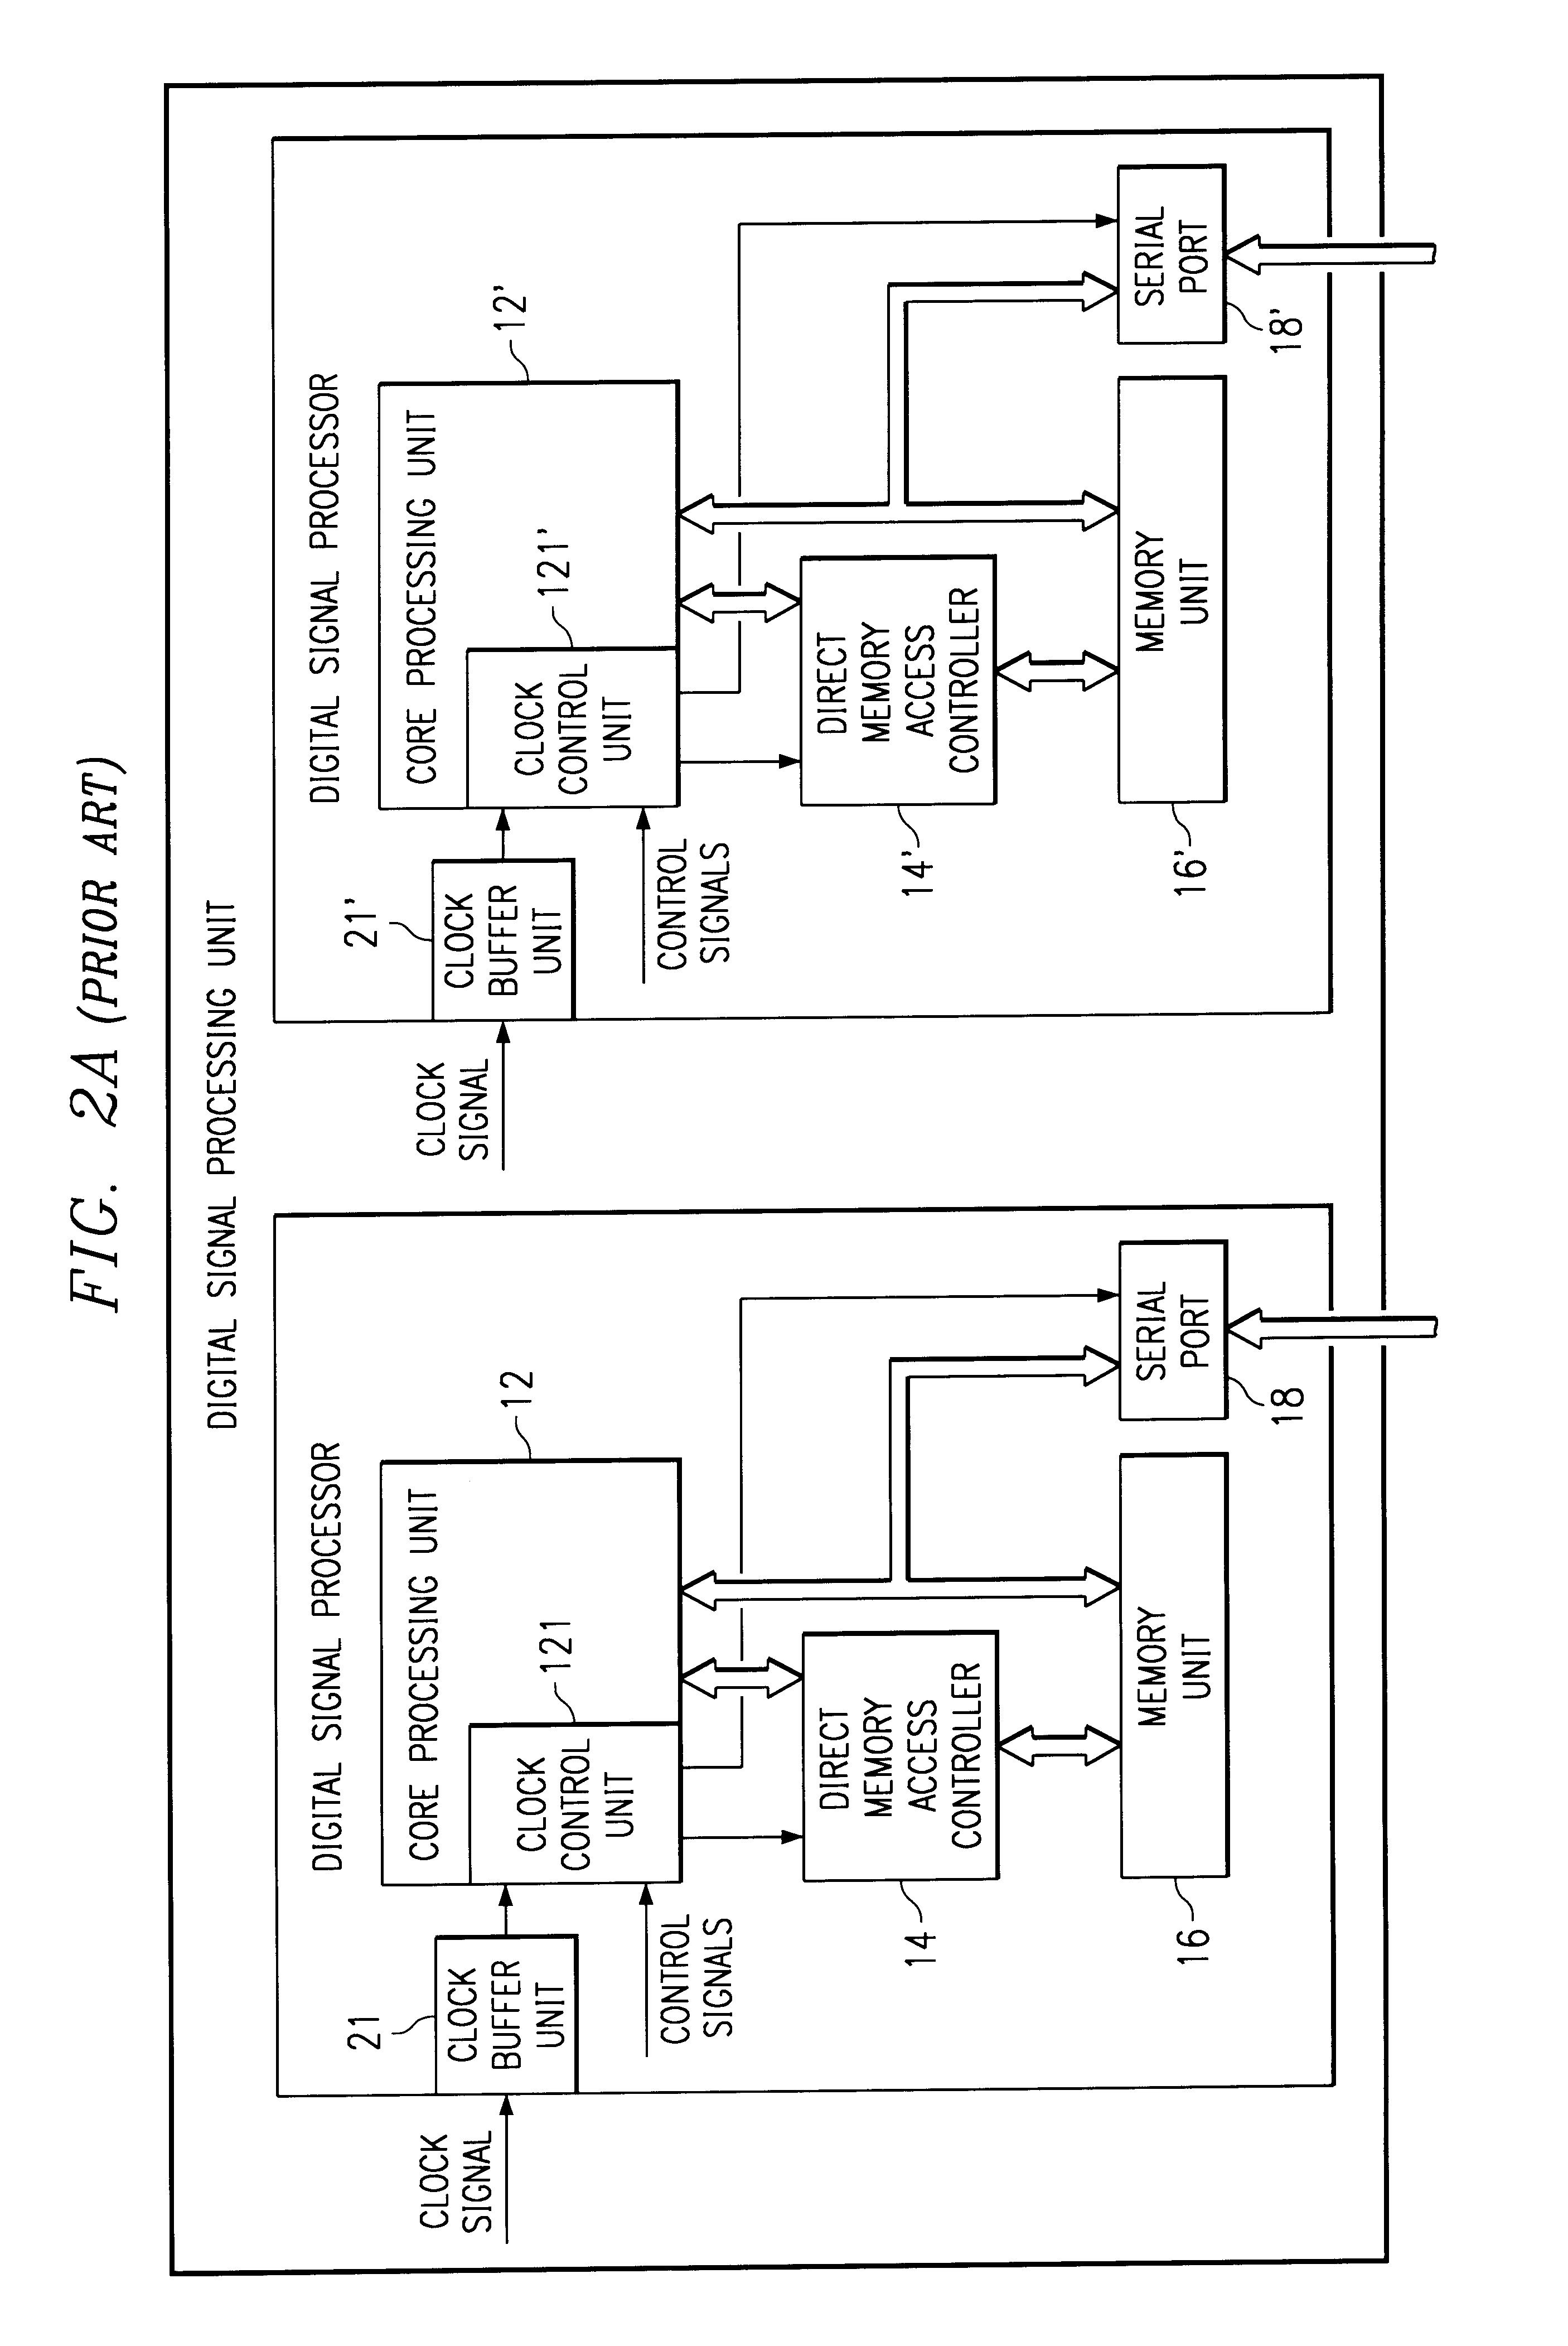 Apparatus and method for activation of a digital signal processor in an idle mode for interprocessor transfer of signal groups in a digital signal processing unit